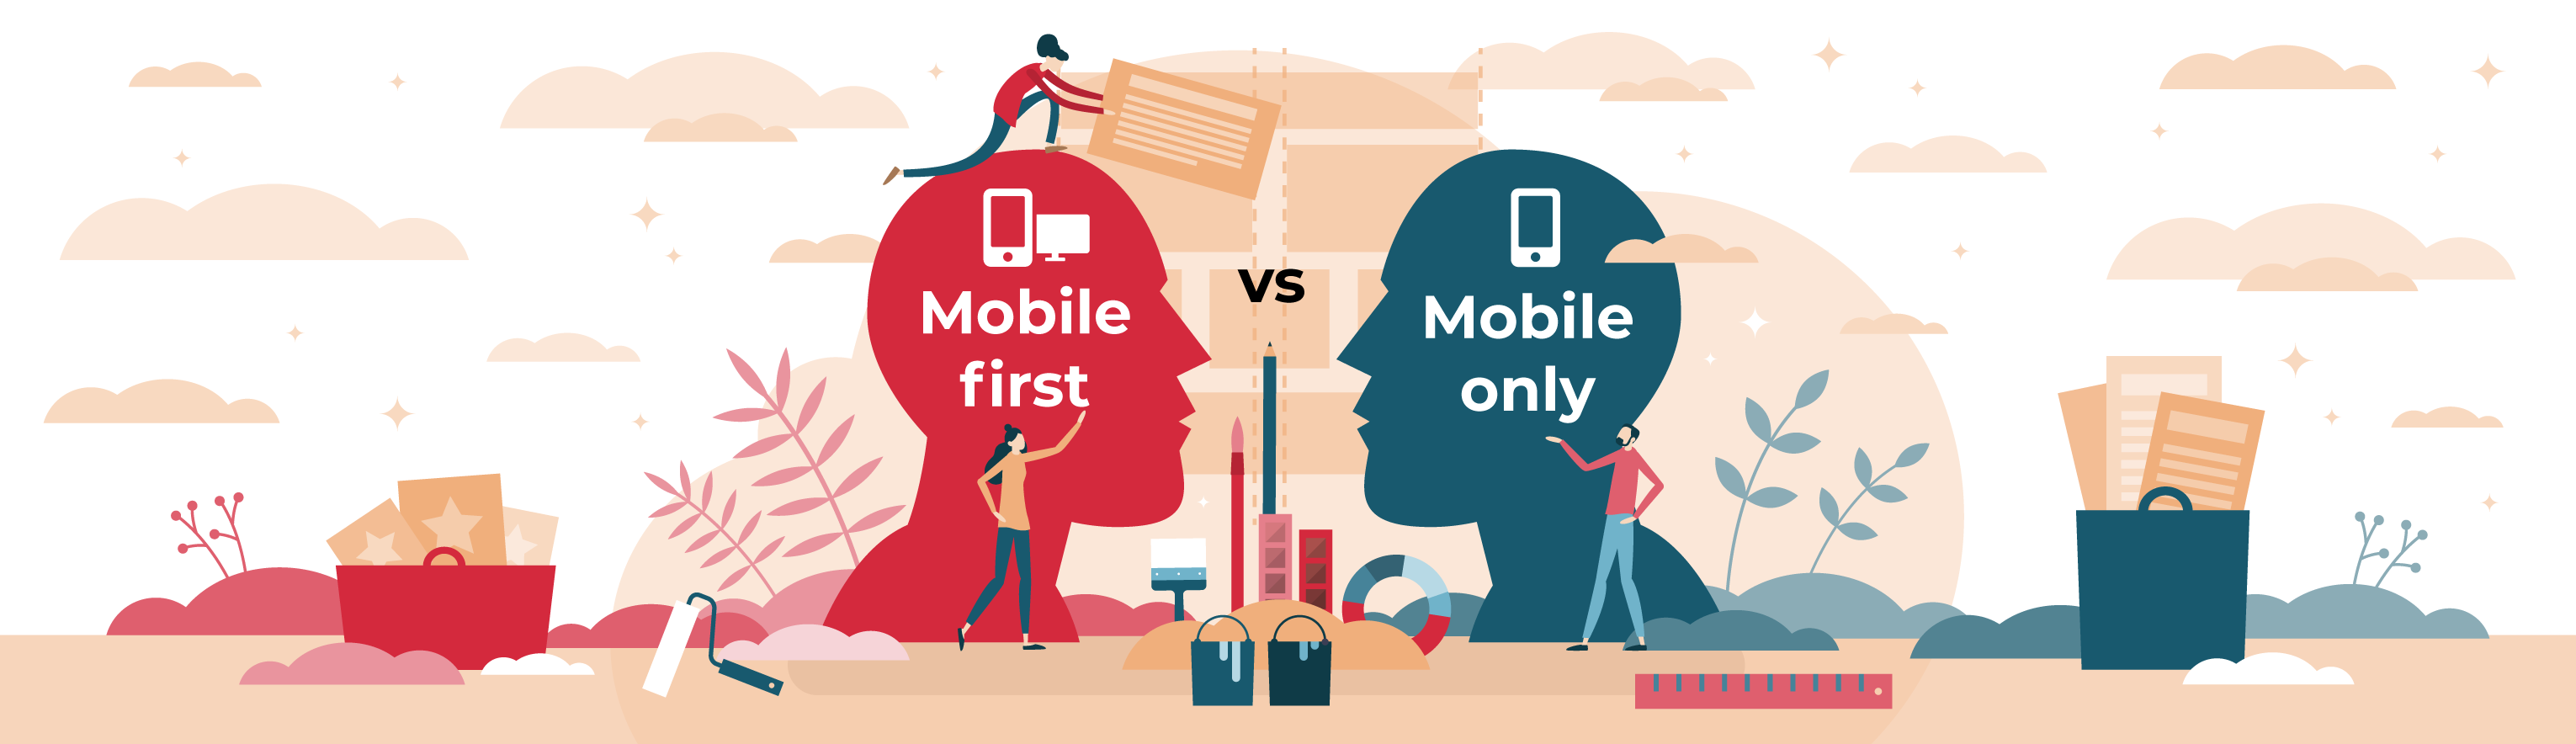 Responsives Design: "Mobile First" vs. "Mobile Only"